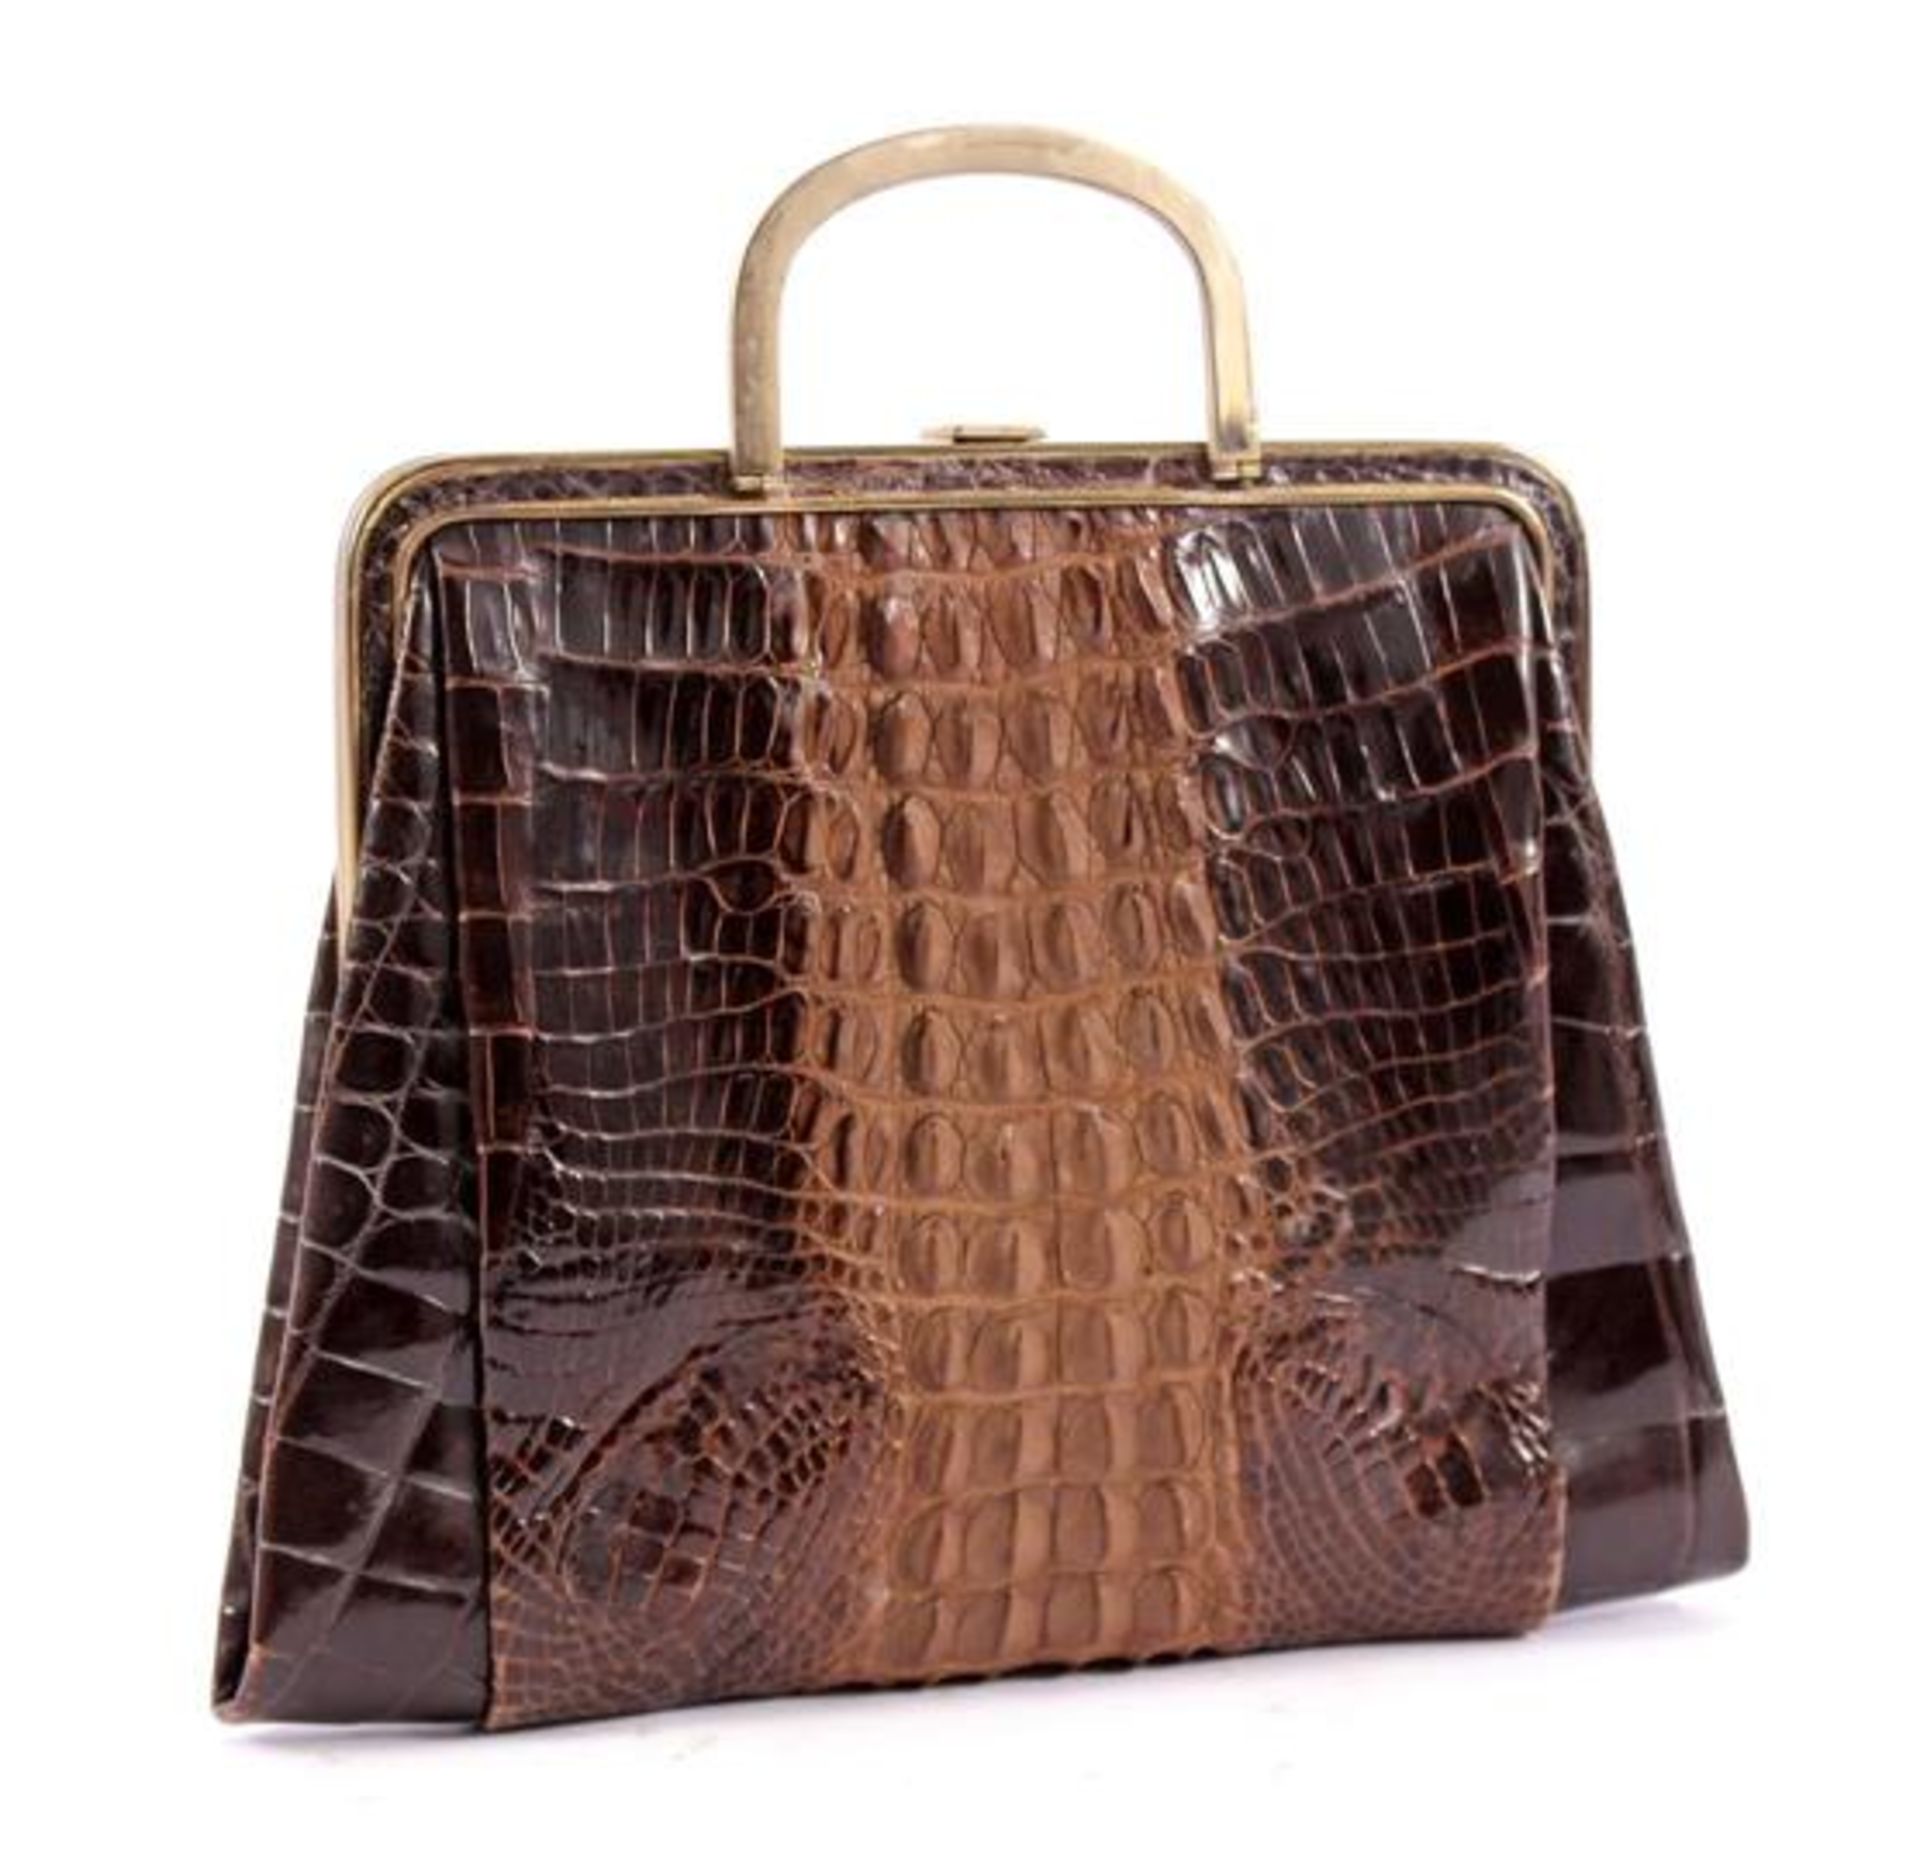 Crocodile leather ladies' purse with copper frame 19 cm high, 25 cm wide